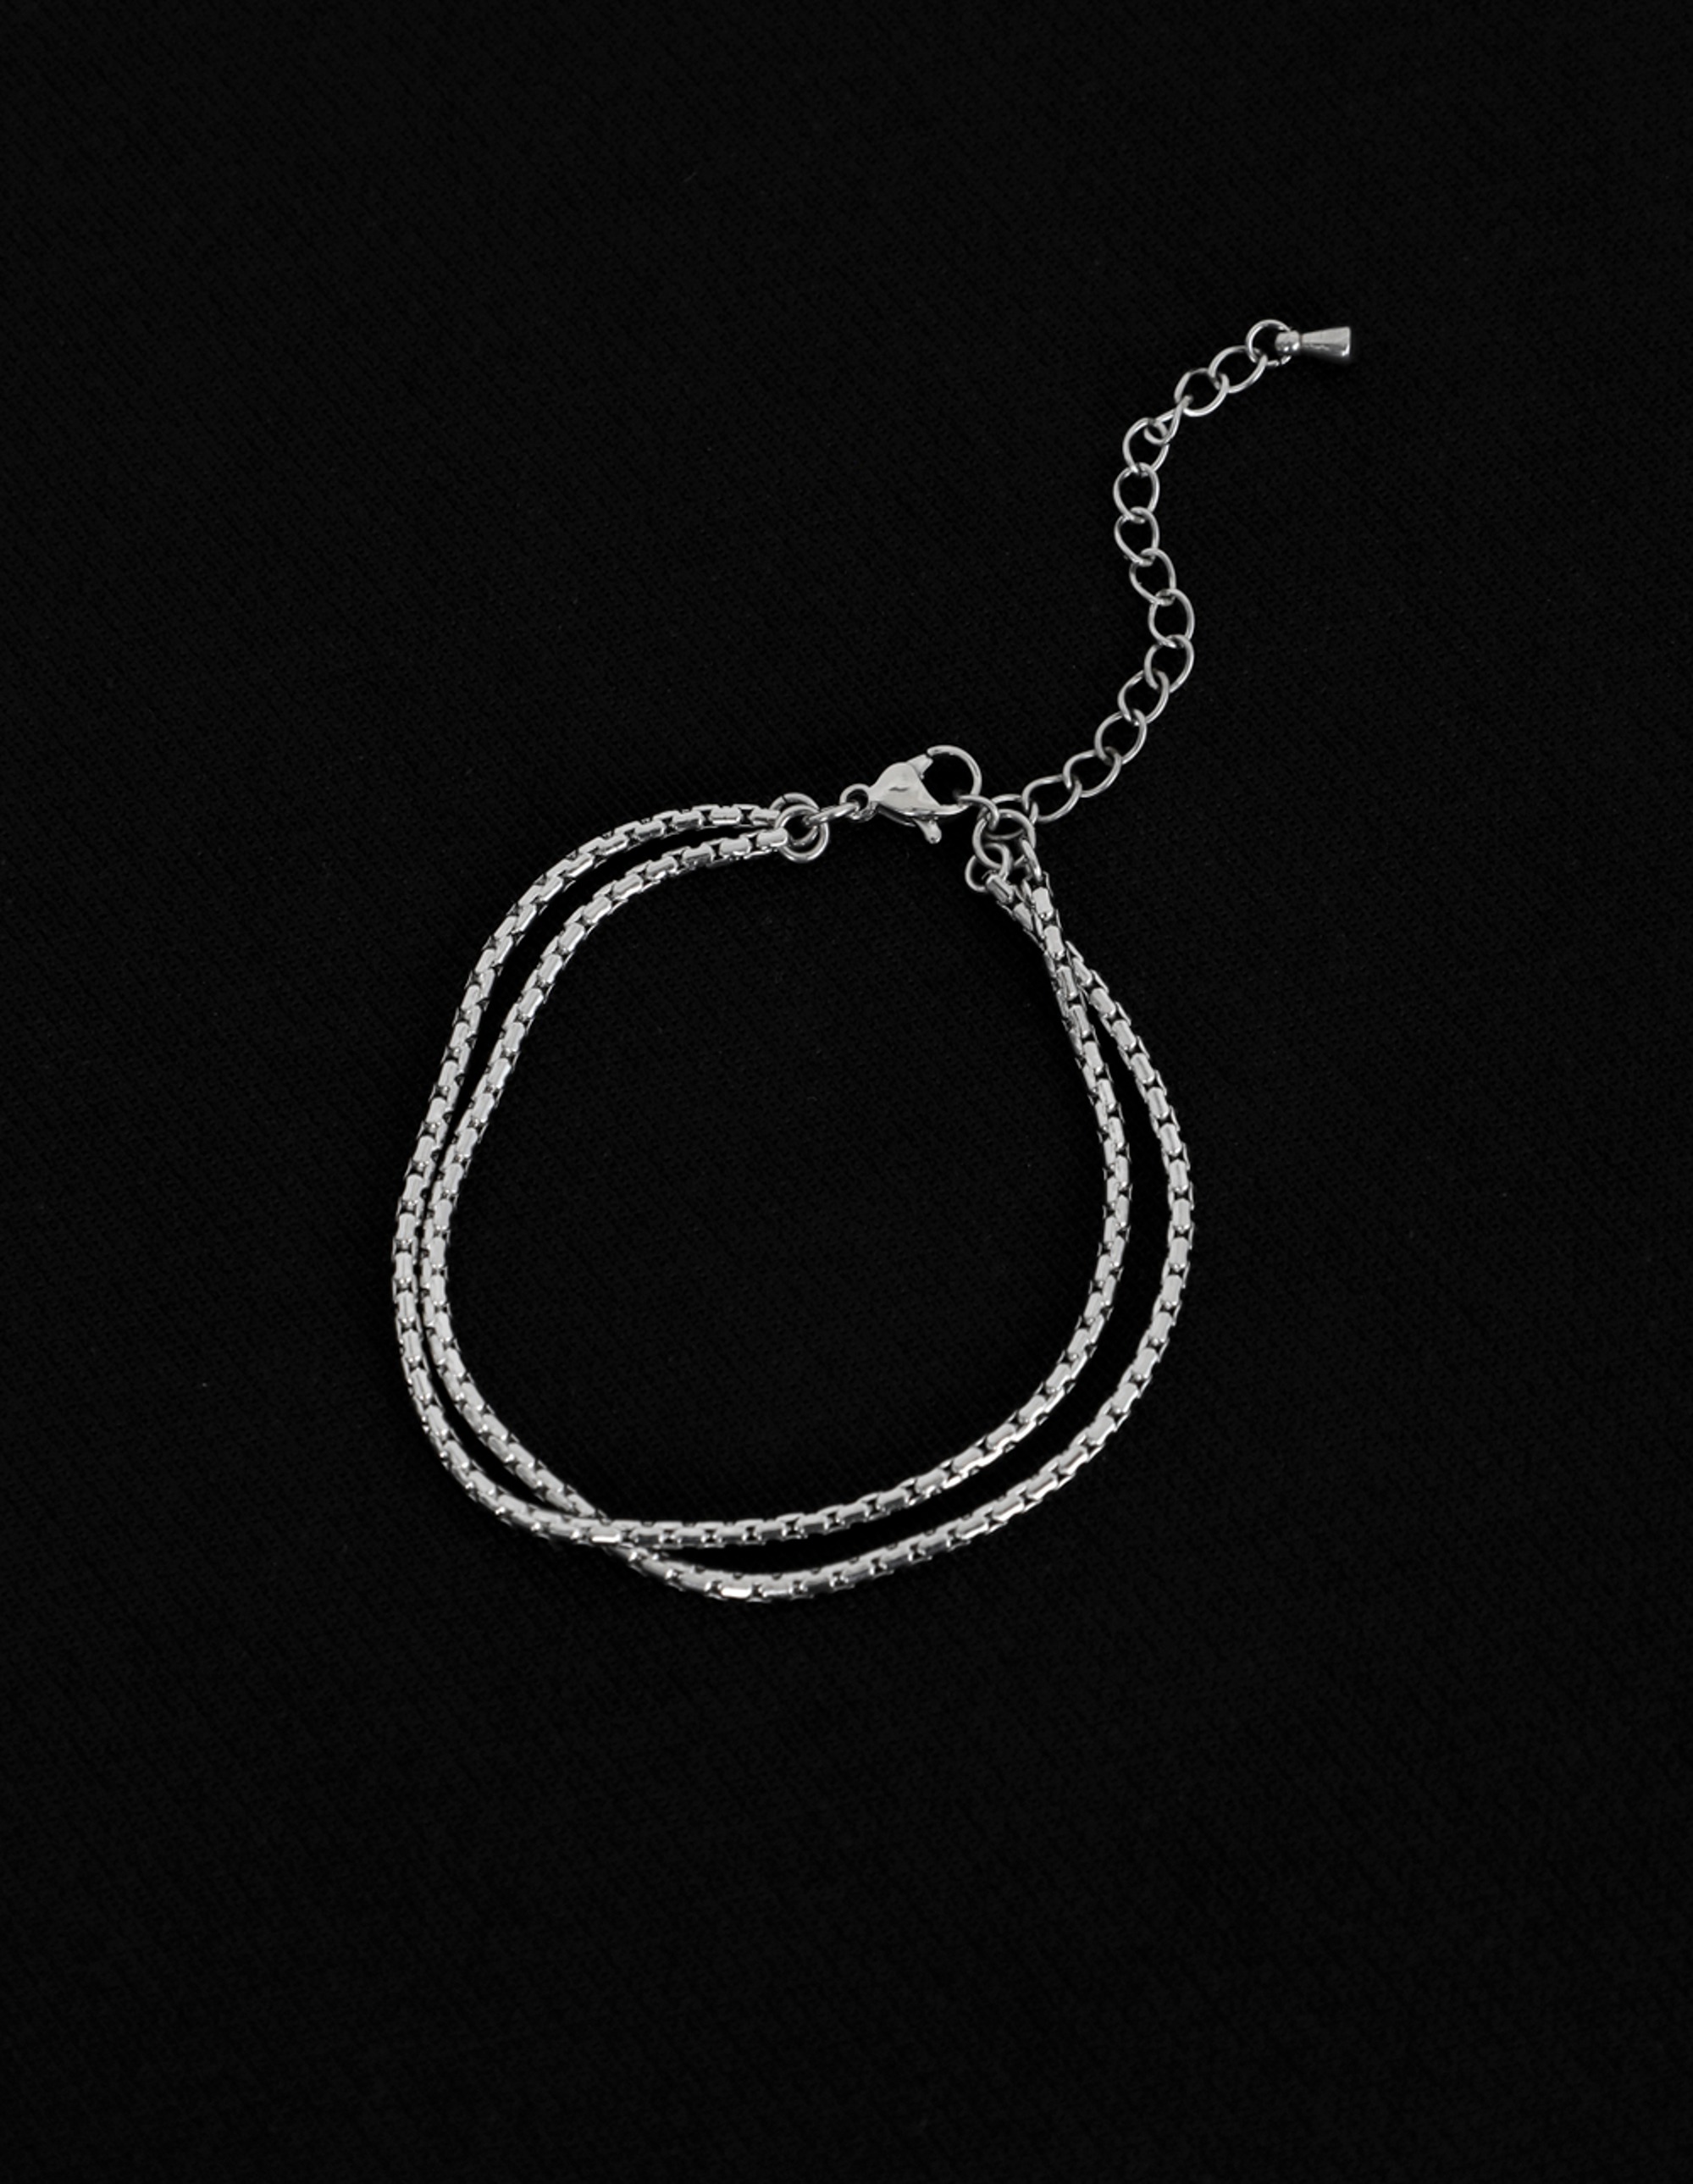 Surgical Two-lines Bracelet